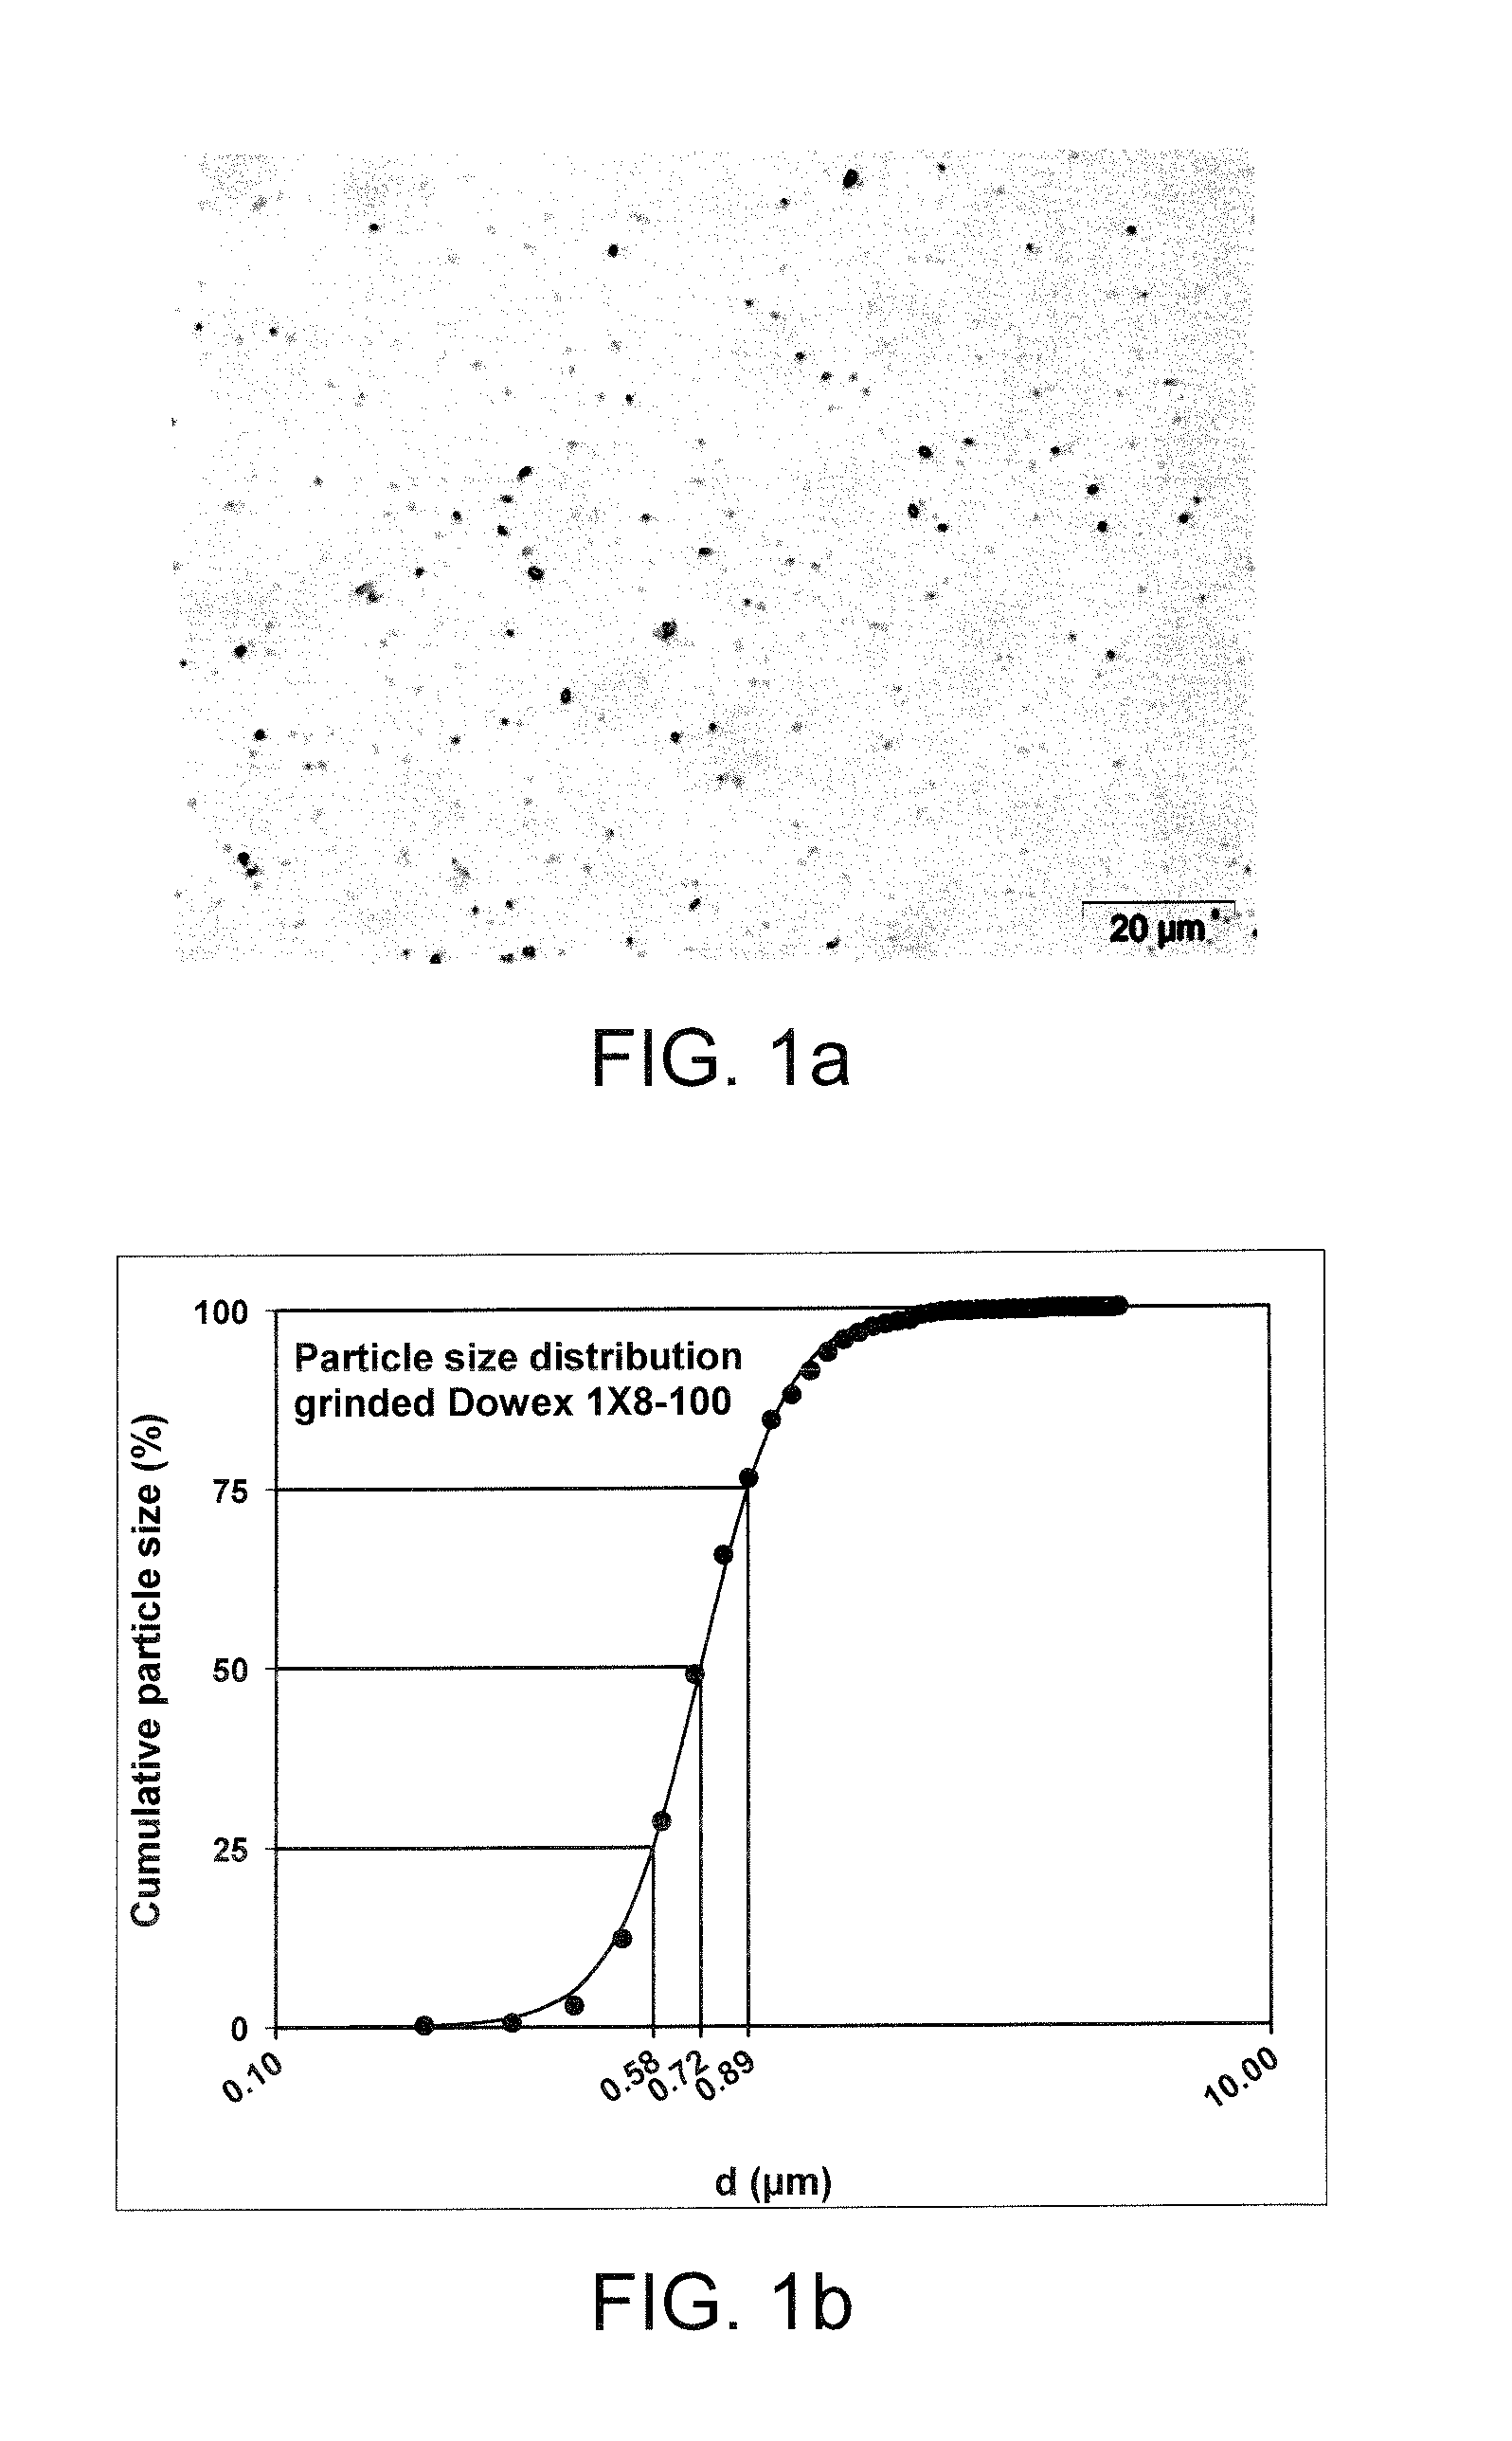 Novel adsorbent composition and use thereof